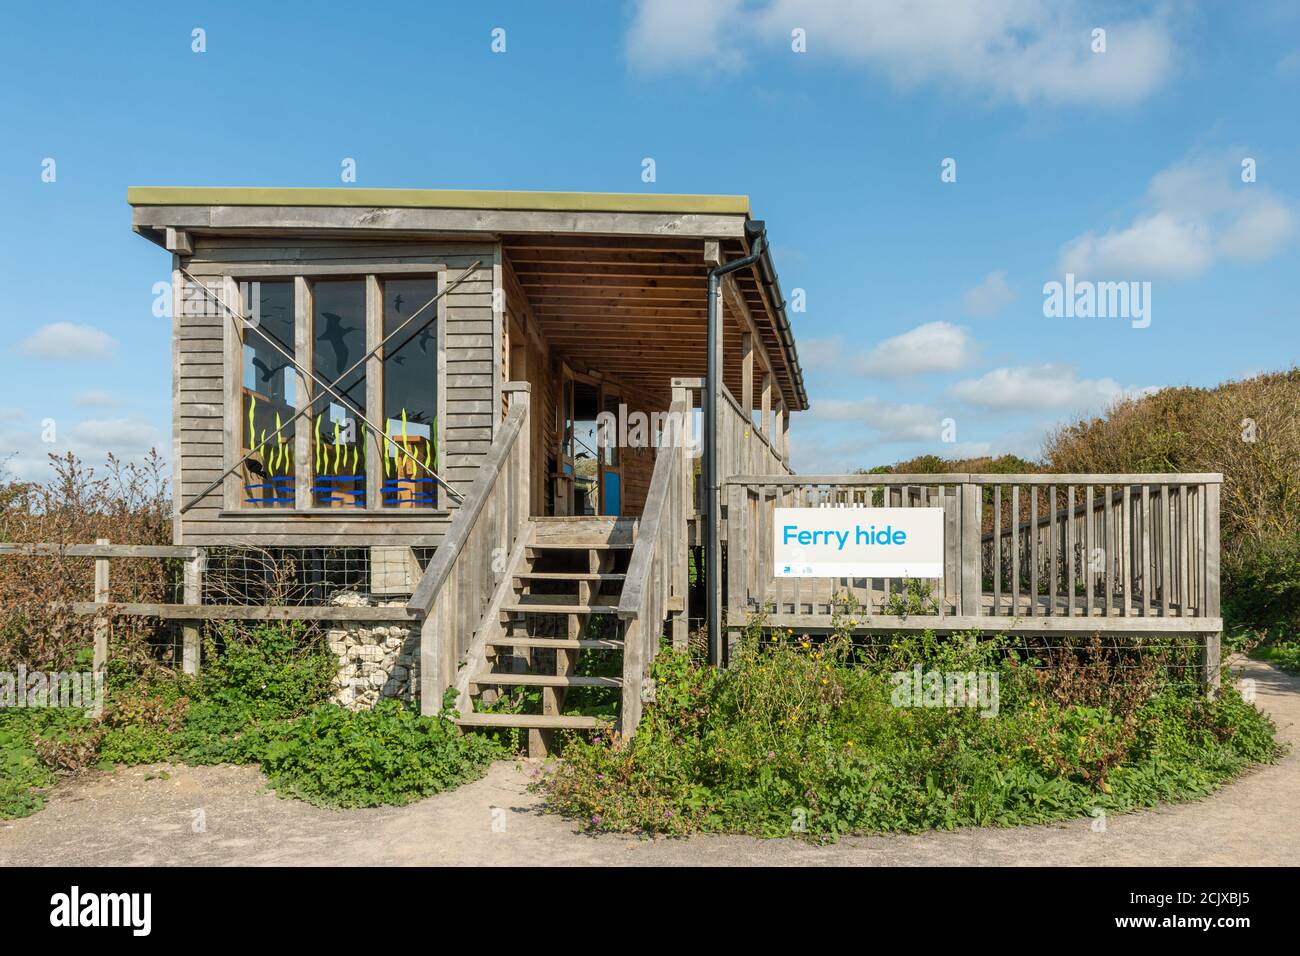 New bird hide at RSPB Pagham Harbour local nature reserve, West Sussex, UK. The Ferry Hide. Stock Photo